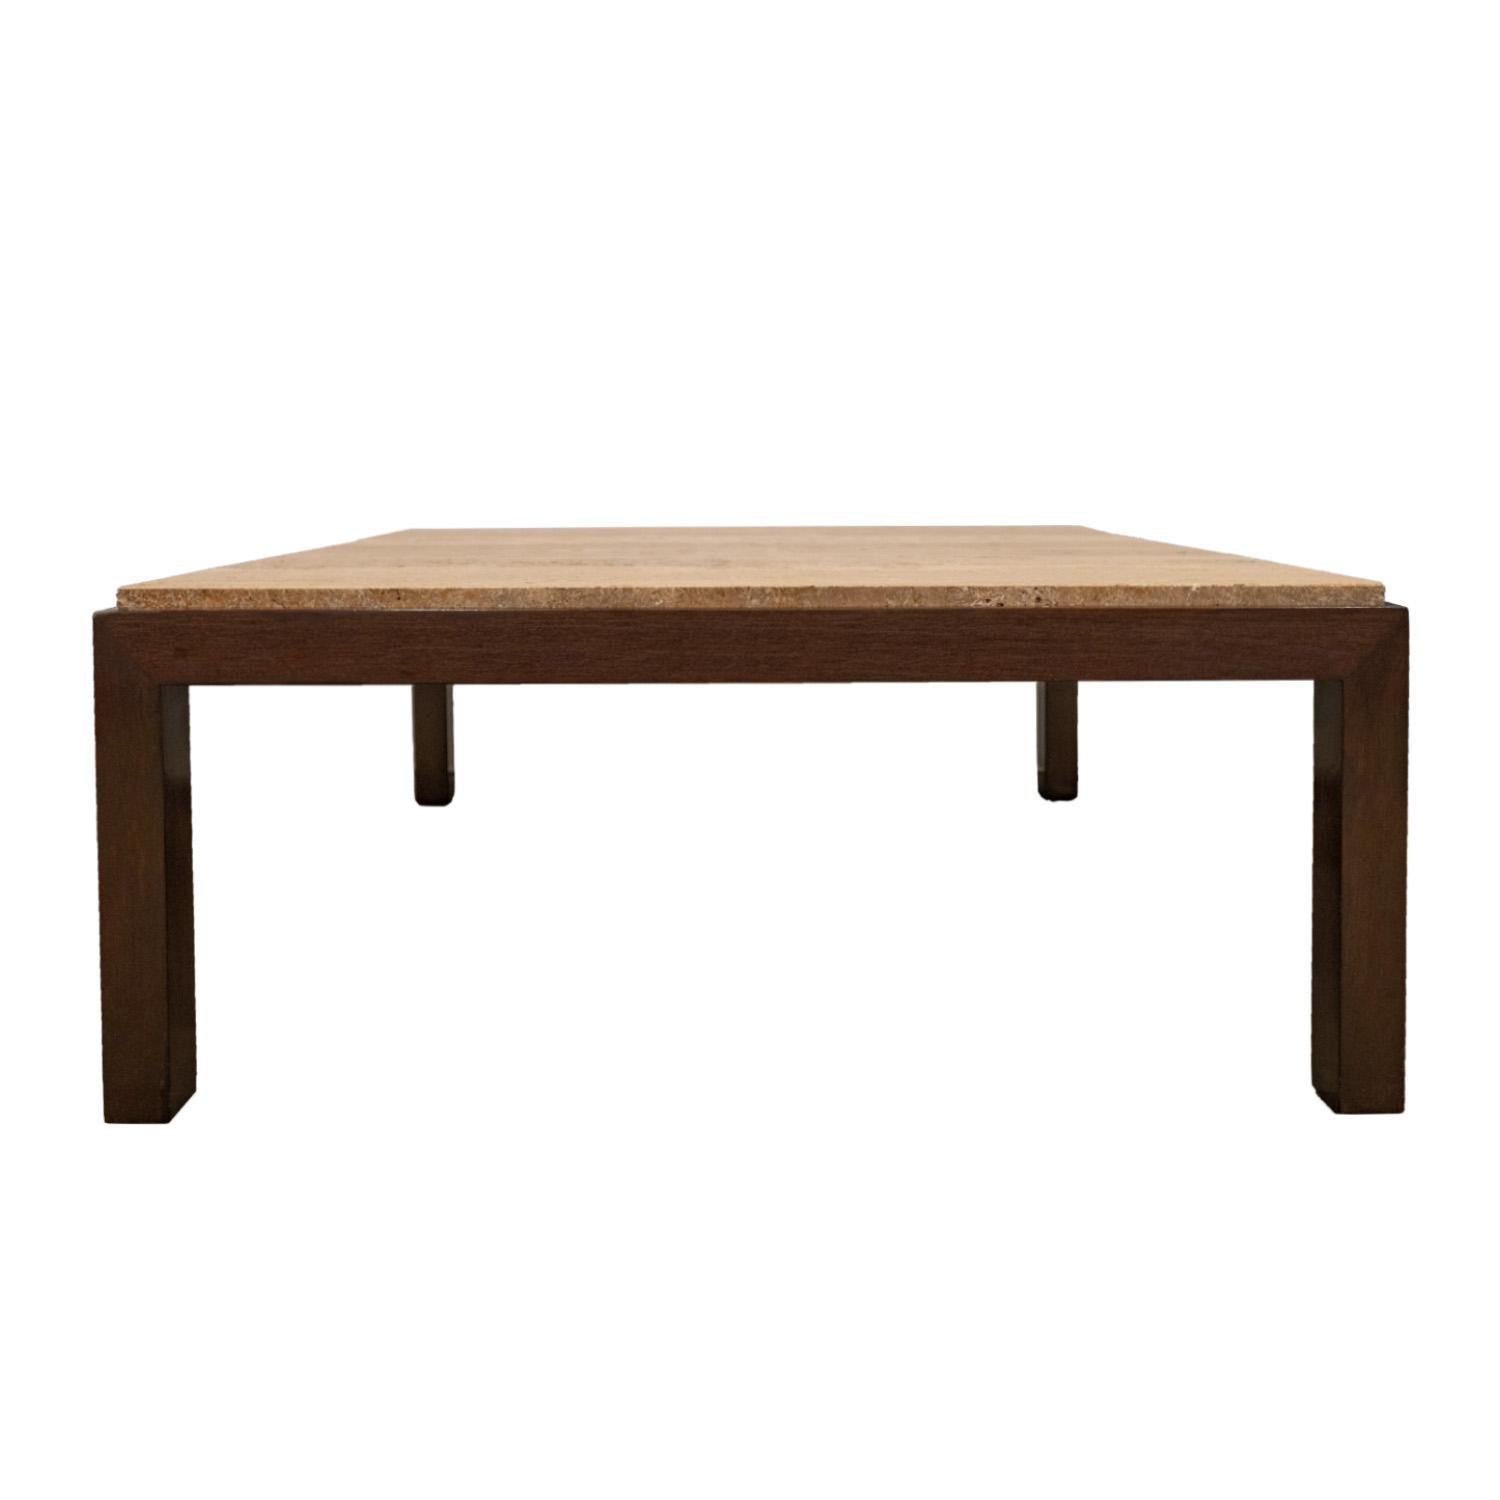 Hand-Crafted Edward Wormley Coffee Table with Italian Travertine Top 1952 'Signed' For Sale